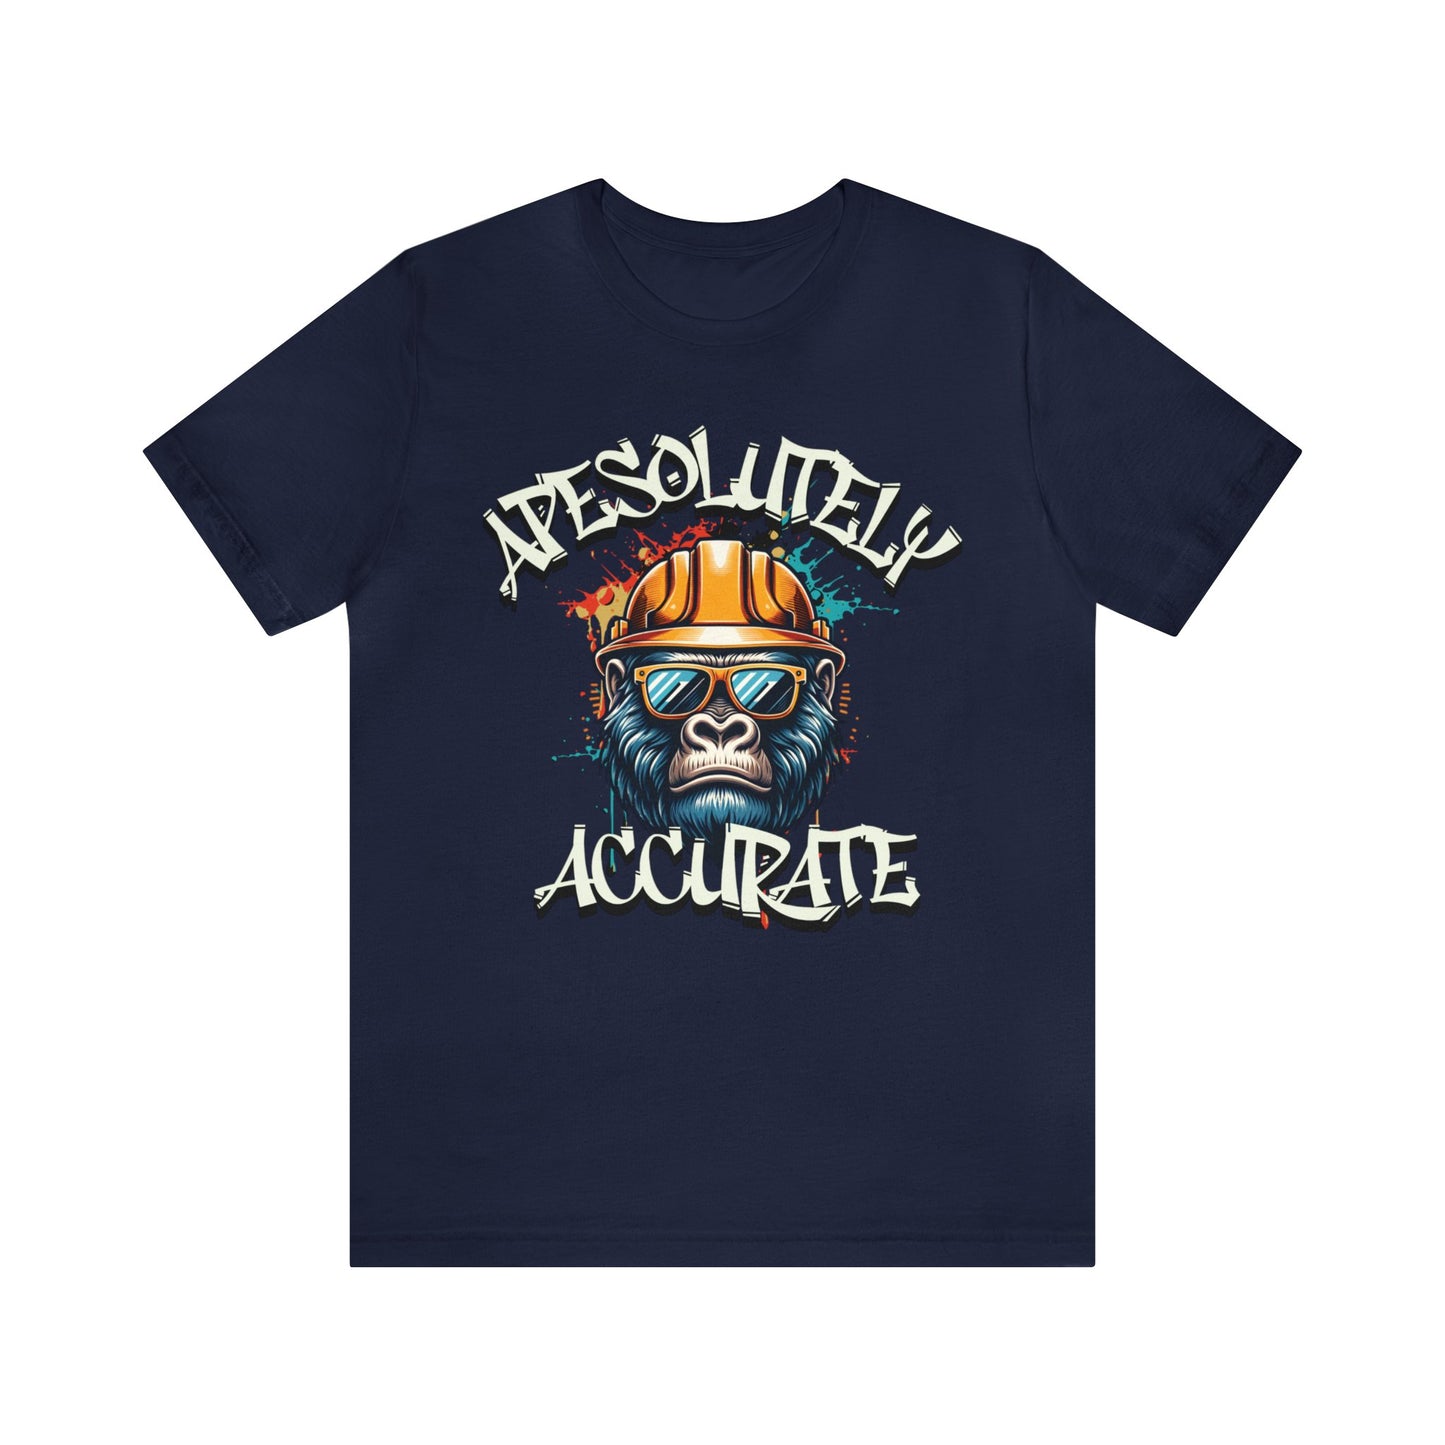 APESOLUTELY ACCURATE Short Sleeve Tee